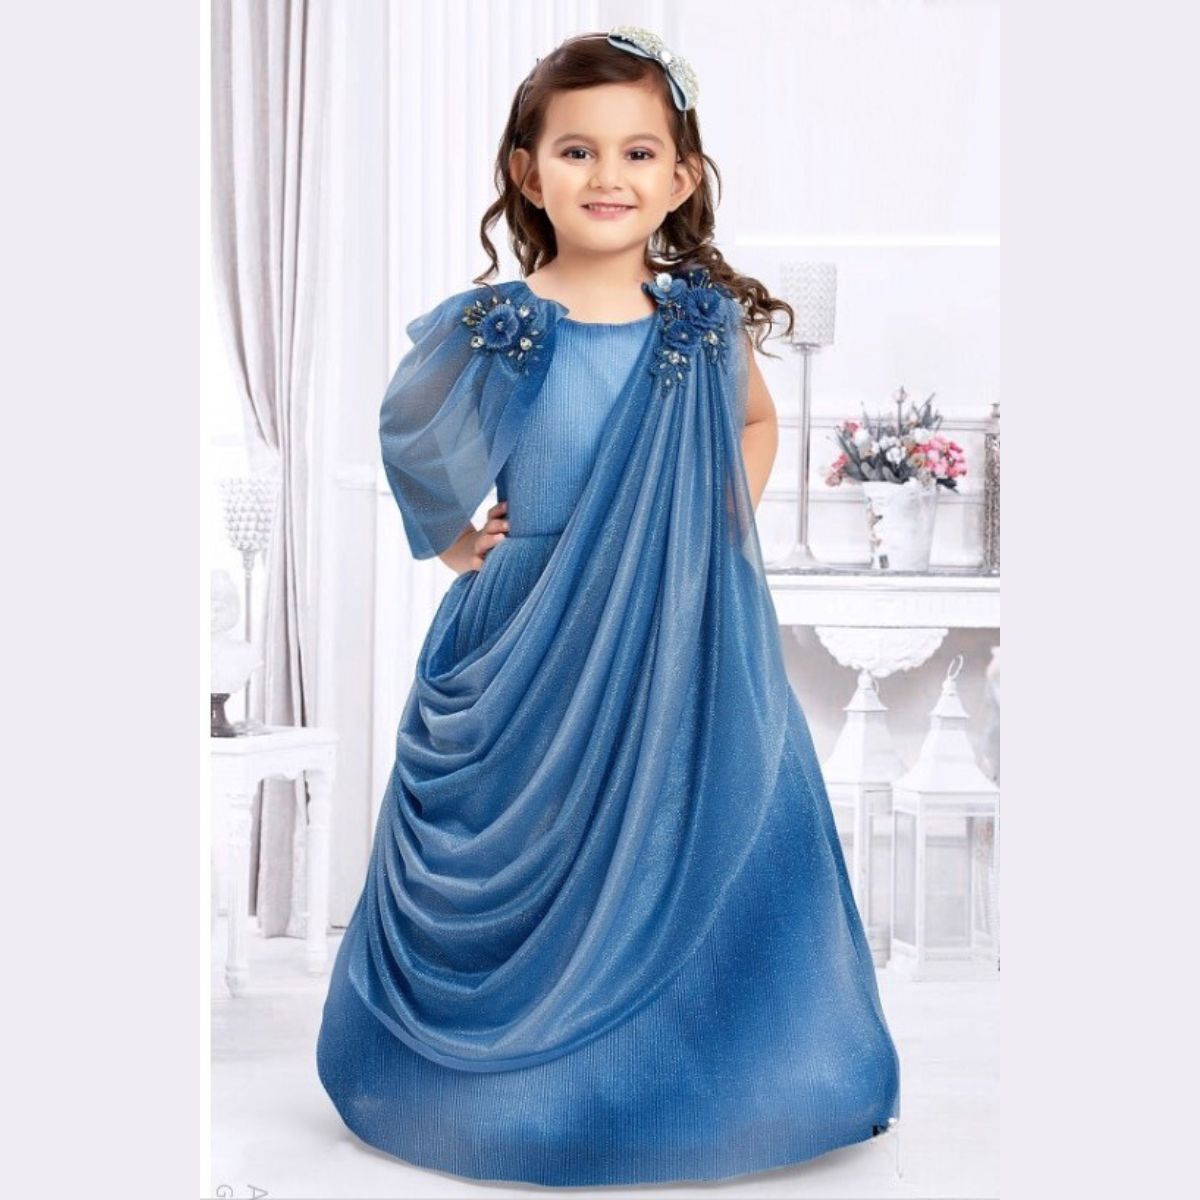 Buy Anneca FASHION Girl Fit and Flare Dress/Baby Dress/Kids Girl Dress_2-6  Year (Airforce, 2-3 Years) at Amazon.in